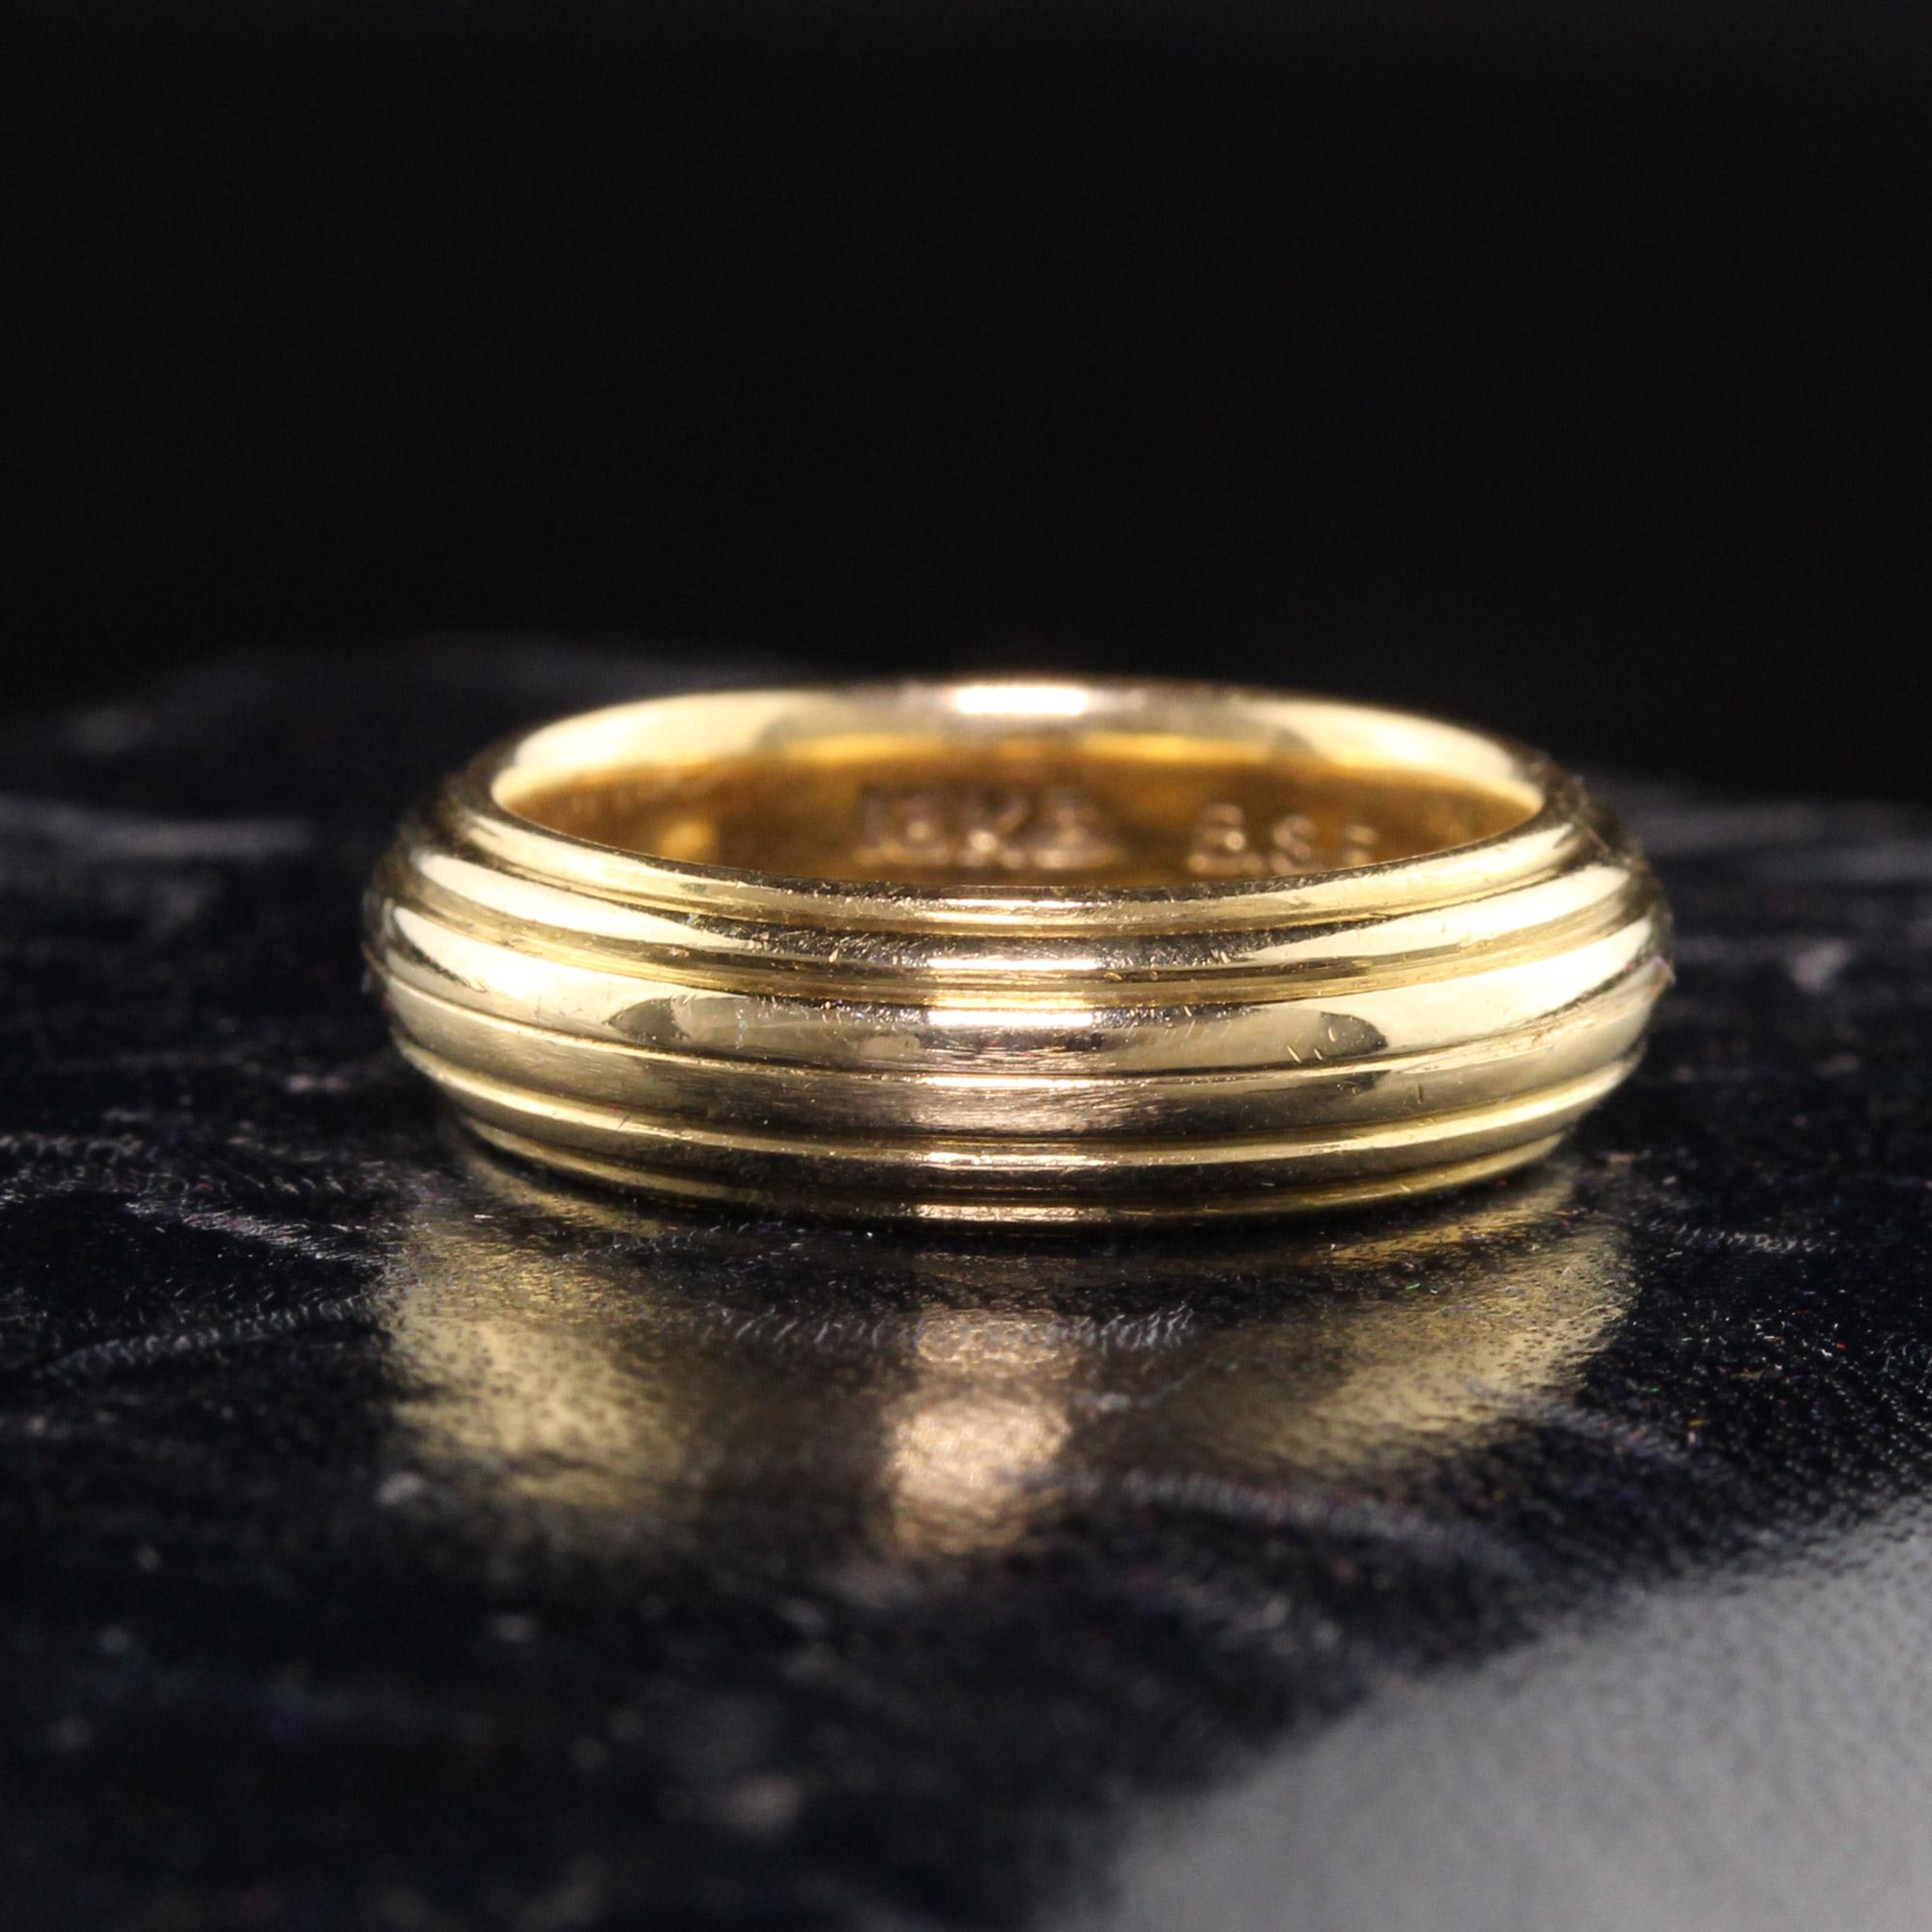 Beautiful Antique Art Deco Black Starr and Frost 18K Yellow Gold Wide Wedding Band. This amazing Black Starr and Frost wedding band is solid and has clean line engravings around the entire ring.

Item #R0975

Metal: 18K Yellow Gold

Weight: 6.4